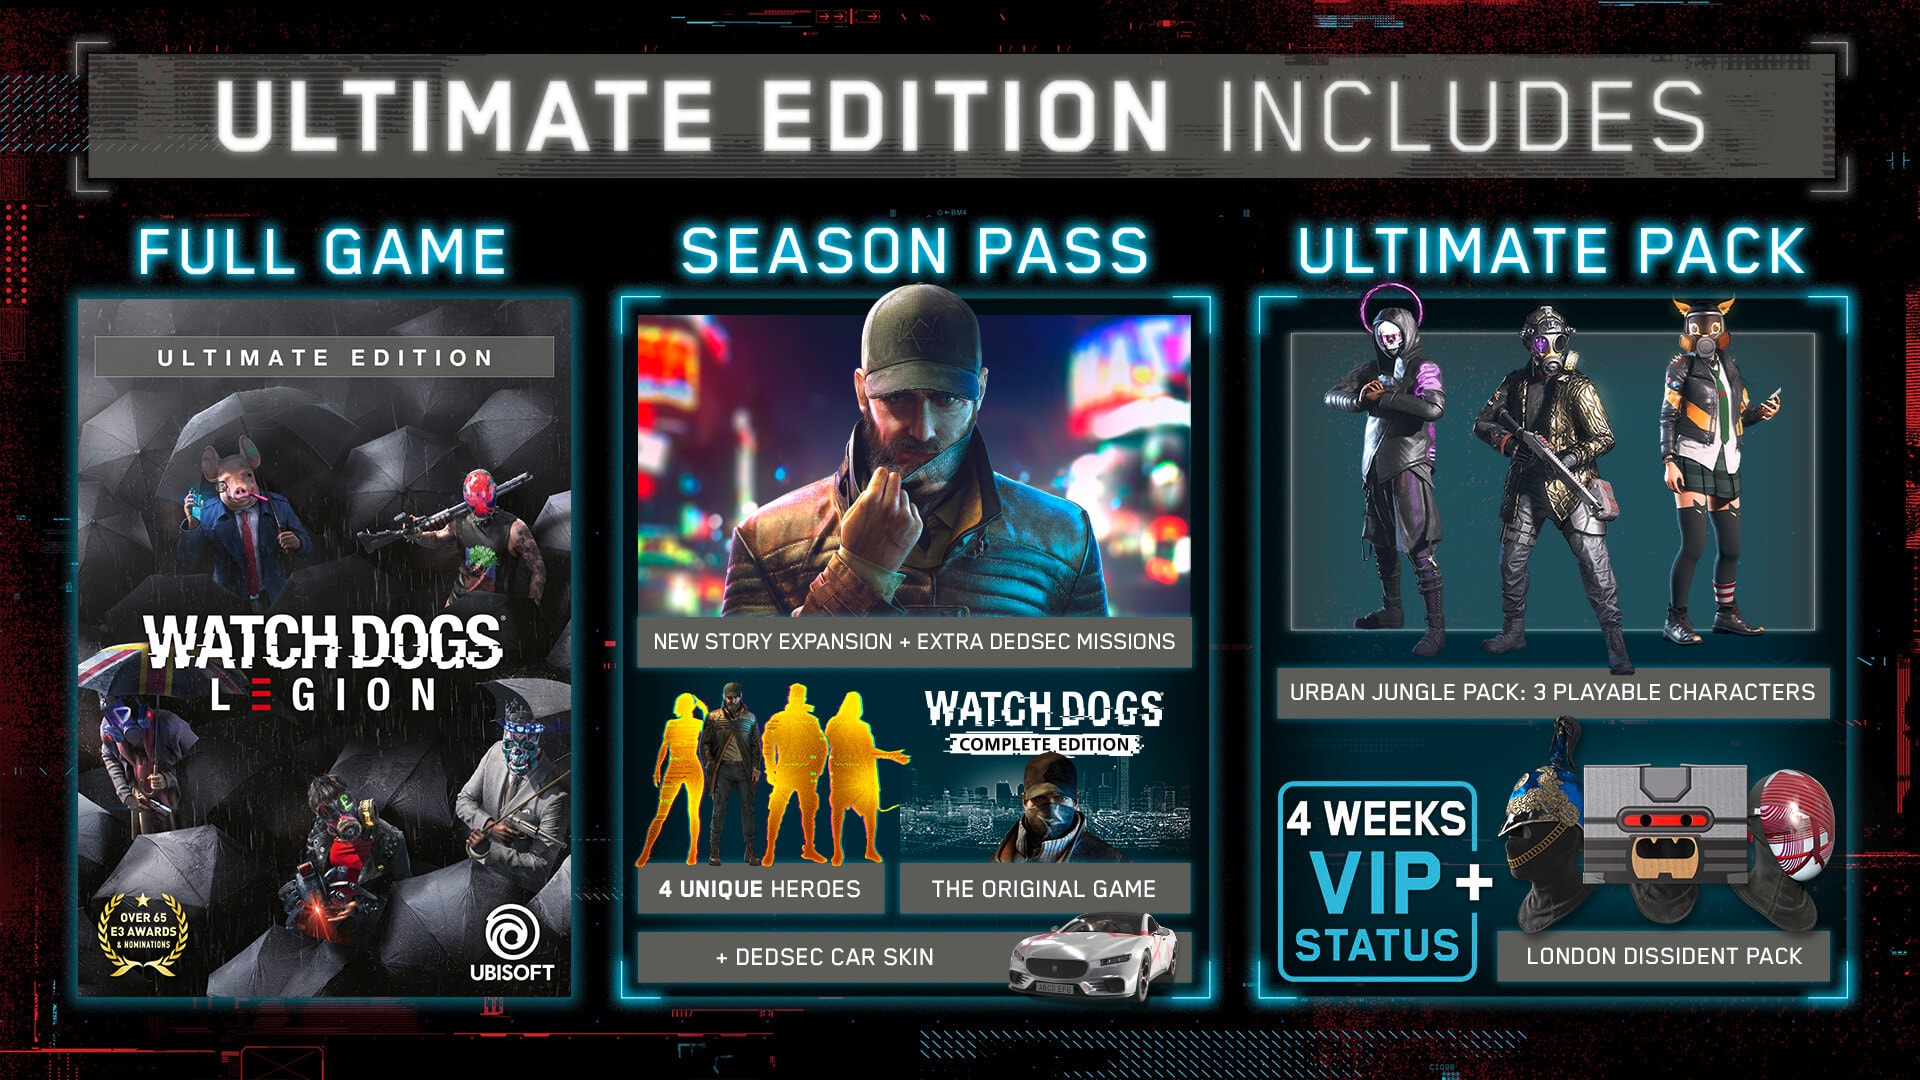 Watch Dogs Legion - Ultimate Edition includes